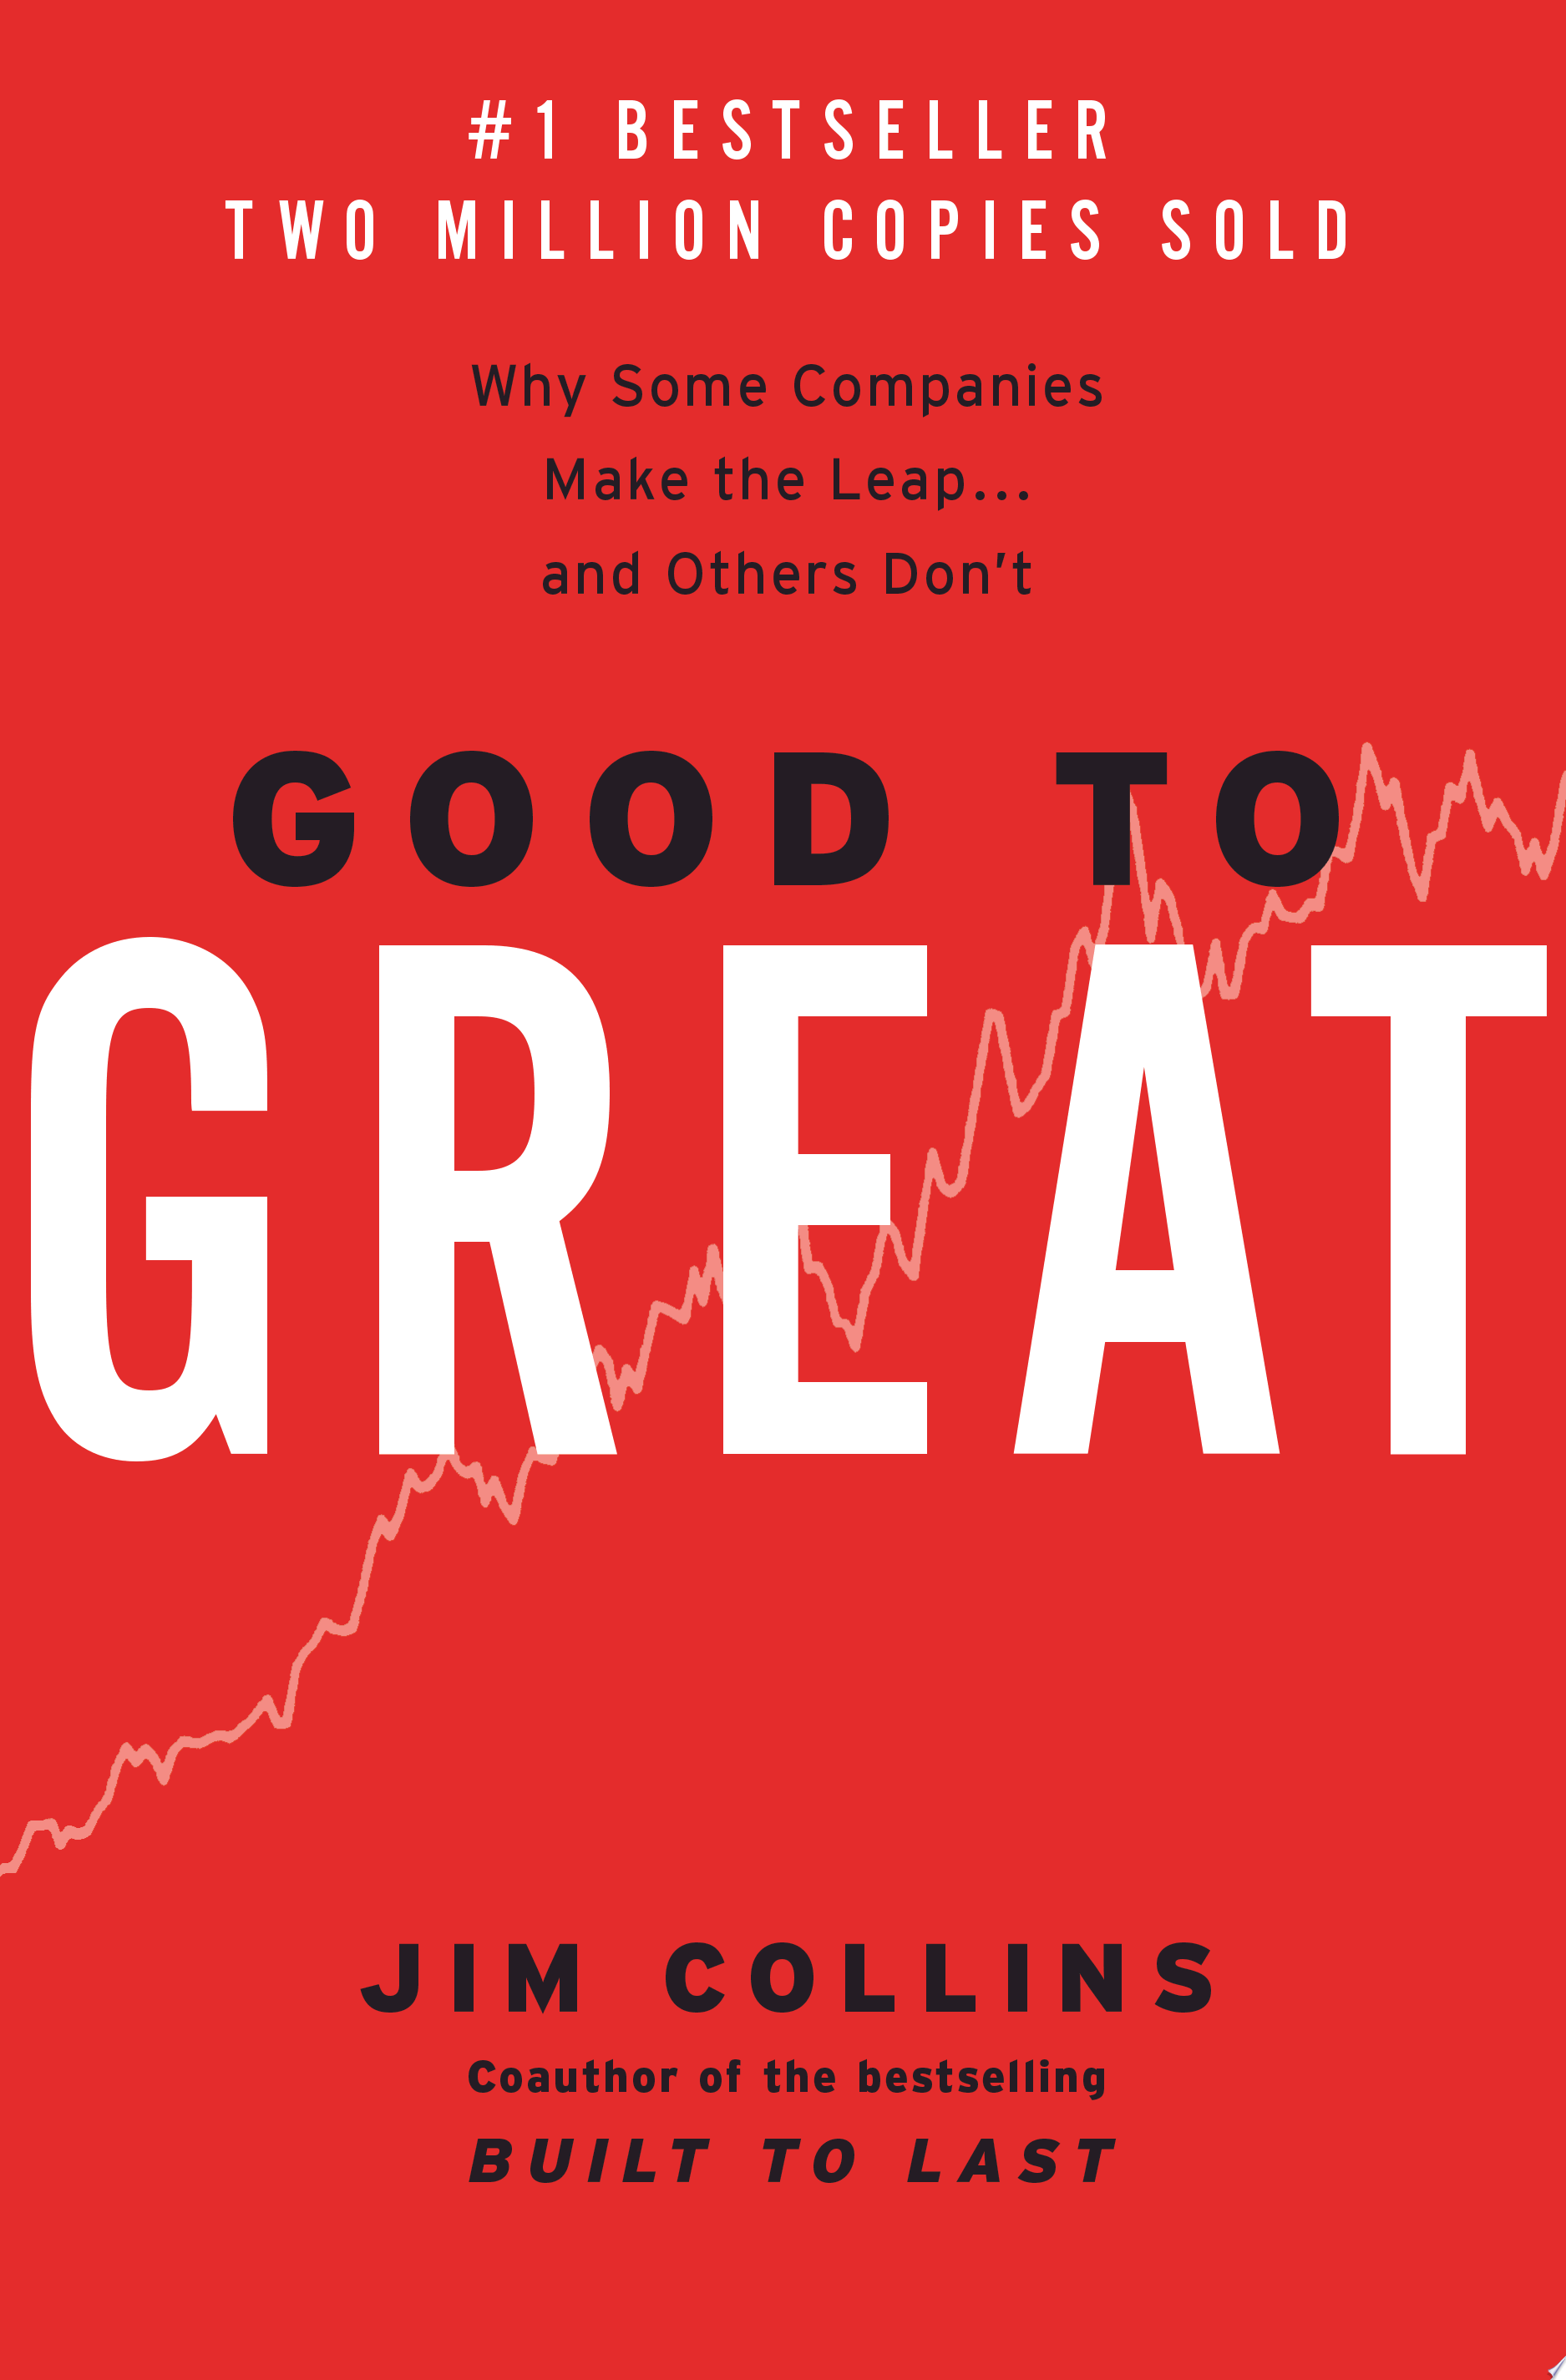 Image for "Good to Great"